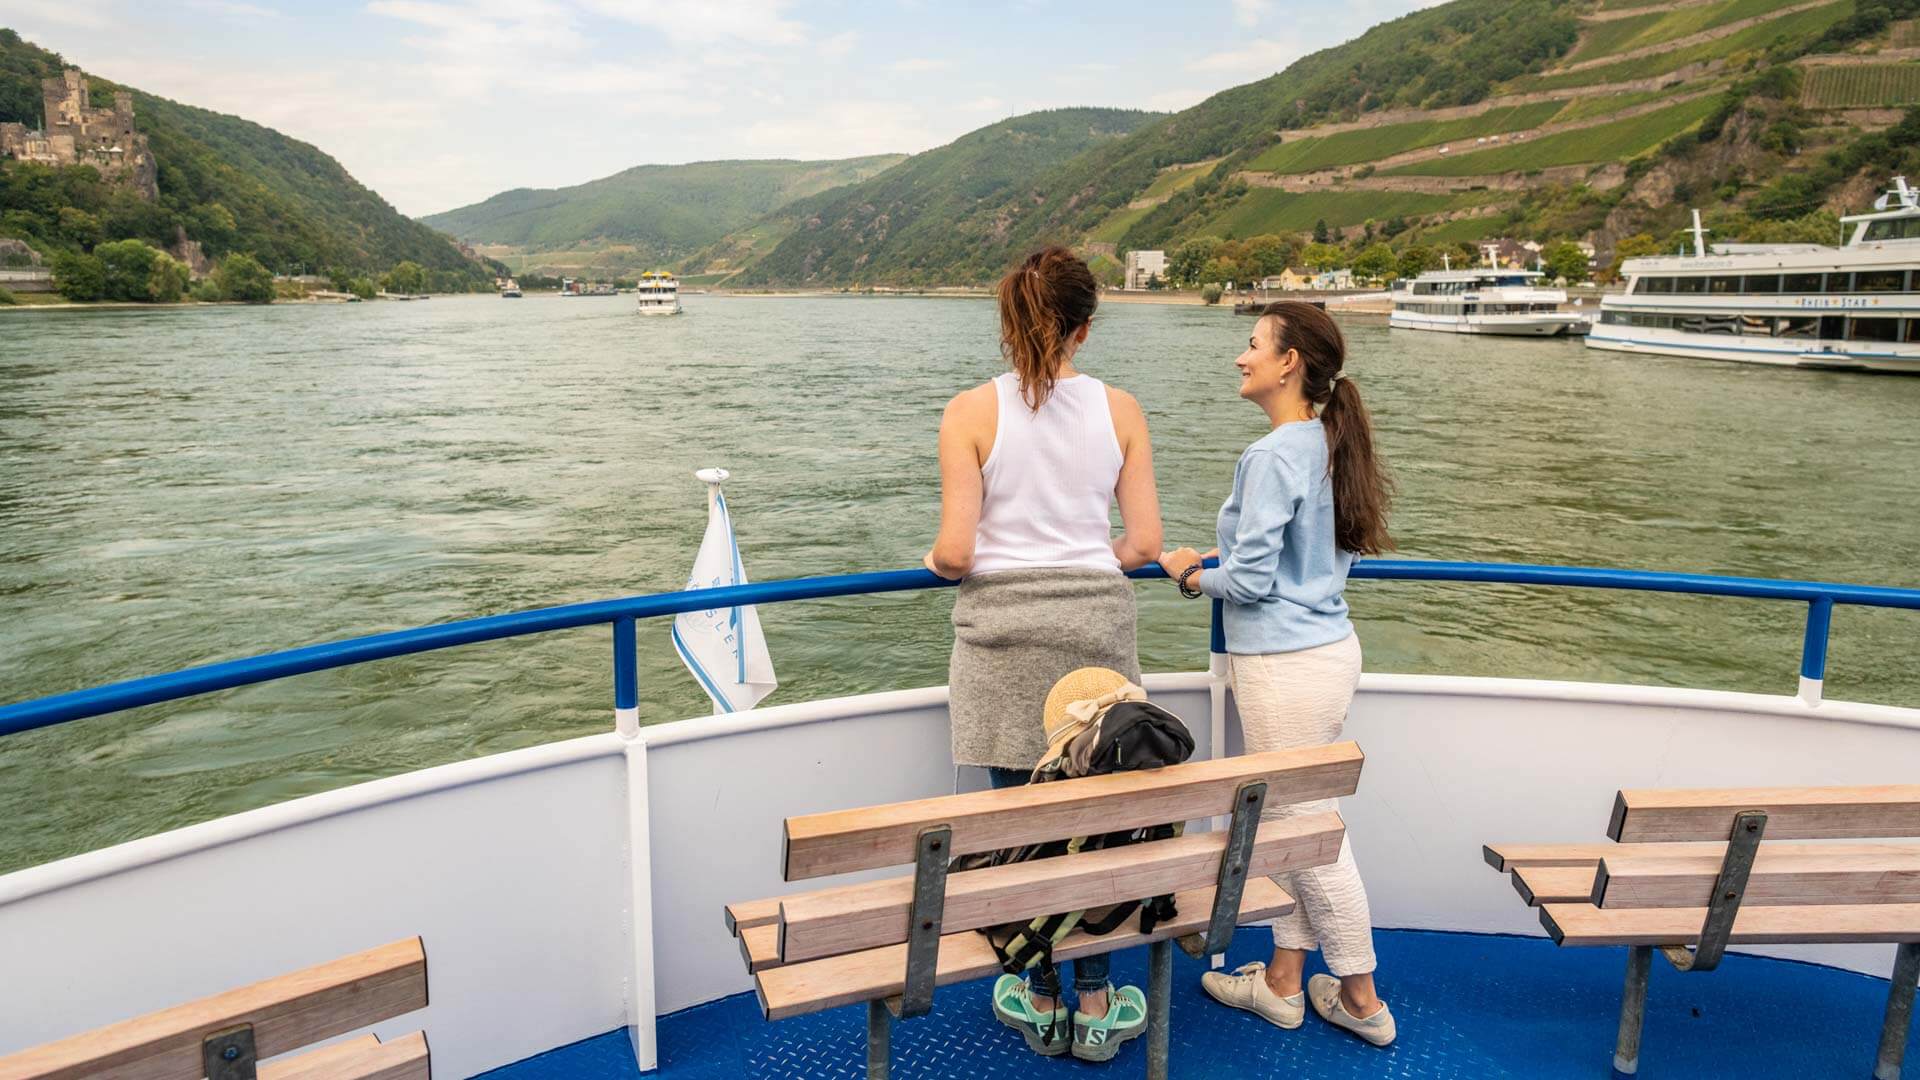 ></center></p><h2>Boat tour offers</h2><p>Rocks of world renown full of myth. This boat tour has a big heart for romantics and makes the fairytale Rhine a reality. Steep vineyards, winding villages, fortified castles and the Loreley as a symbol of legends full of passion. From Bingen to St. Goar - from the tender spring to the golden autumn.</p><p>Duration: 3-4 hours Period: April - October</p><p>Bingen-Rüdesheimer Cologne-Düsseldorf</p><p>from 26 Euro per person round trip Discounts and other scales according to group size</p><p>Get on board and experience the proud witnesses of a past full of adventure and castle magic. Learn more about the 